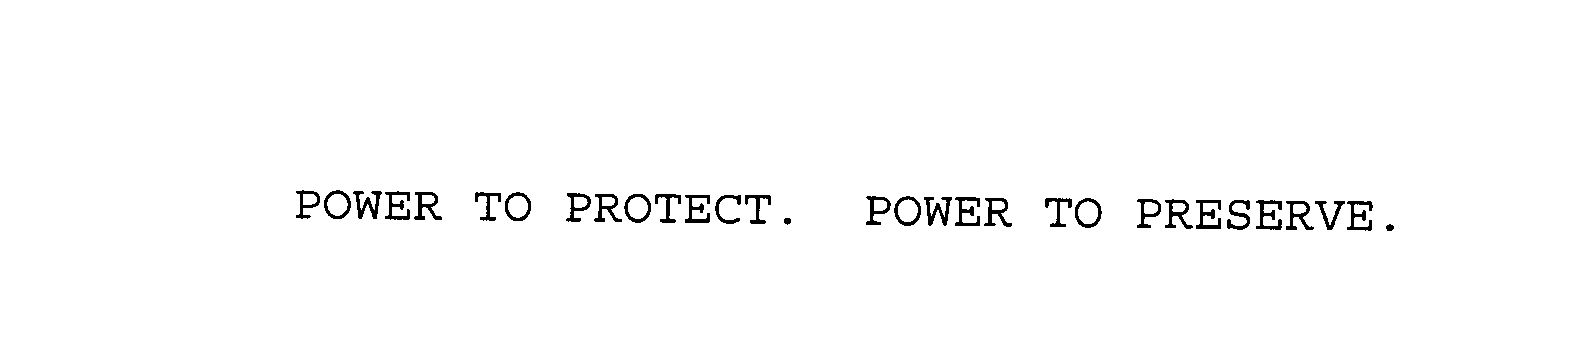  POWER TO PROTECT. POWER TO PRESERVE.